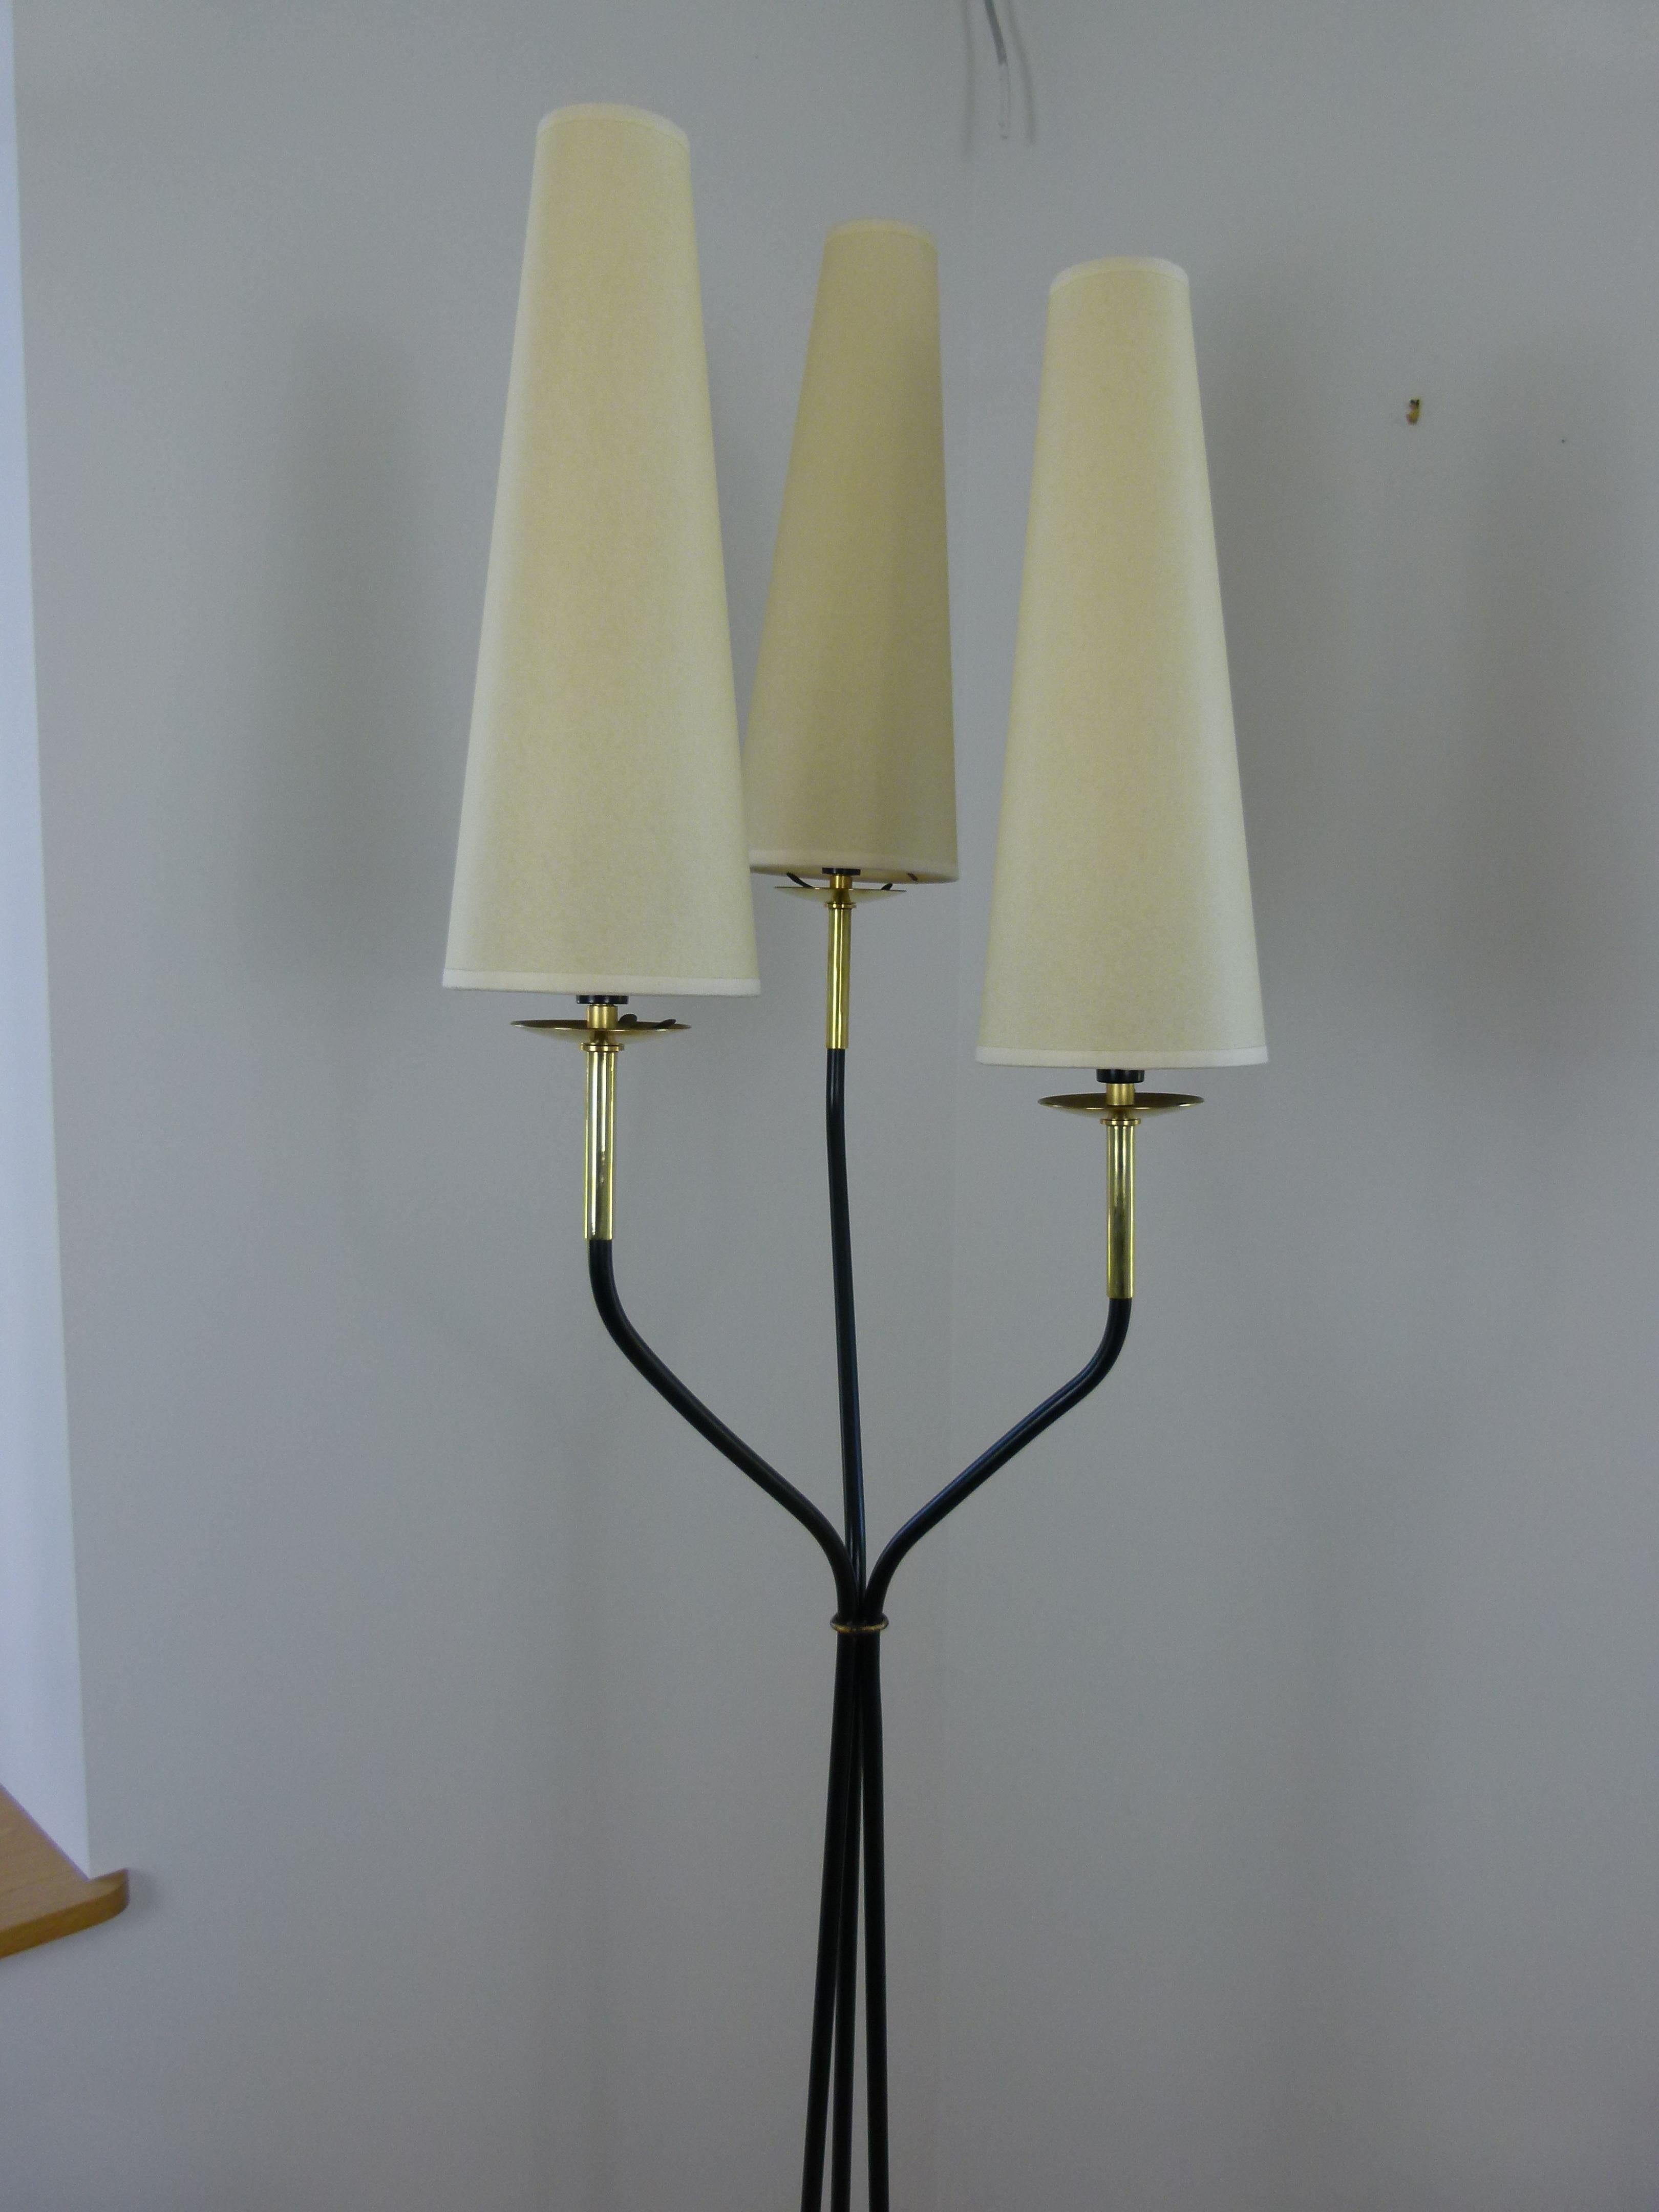 20th Century Pair of 1950s Floor Lamp with Three Illuminated Arms by Maison Lunel